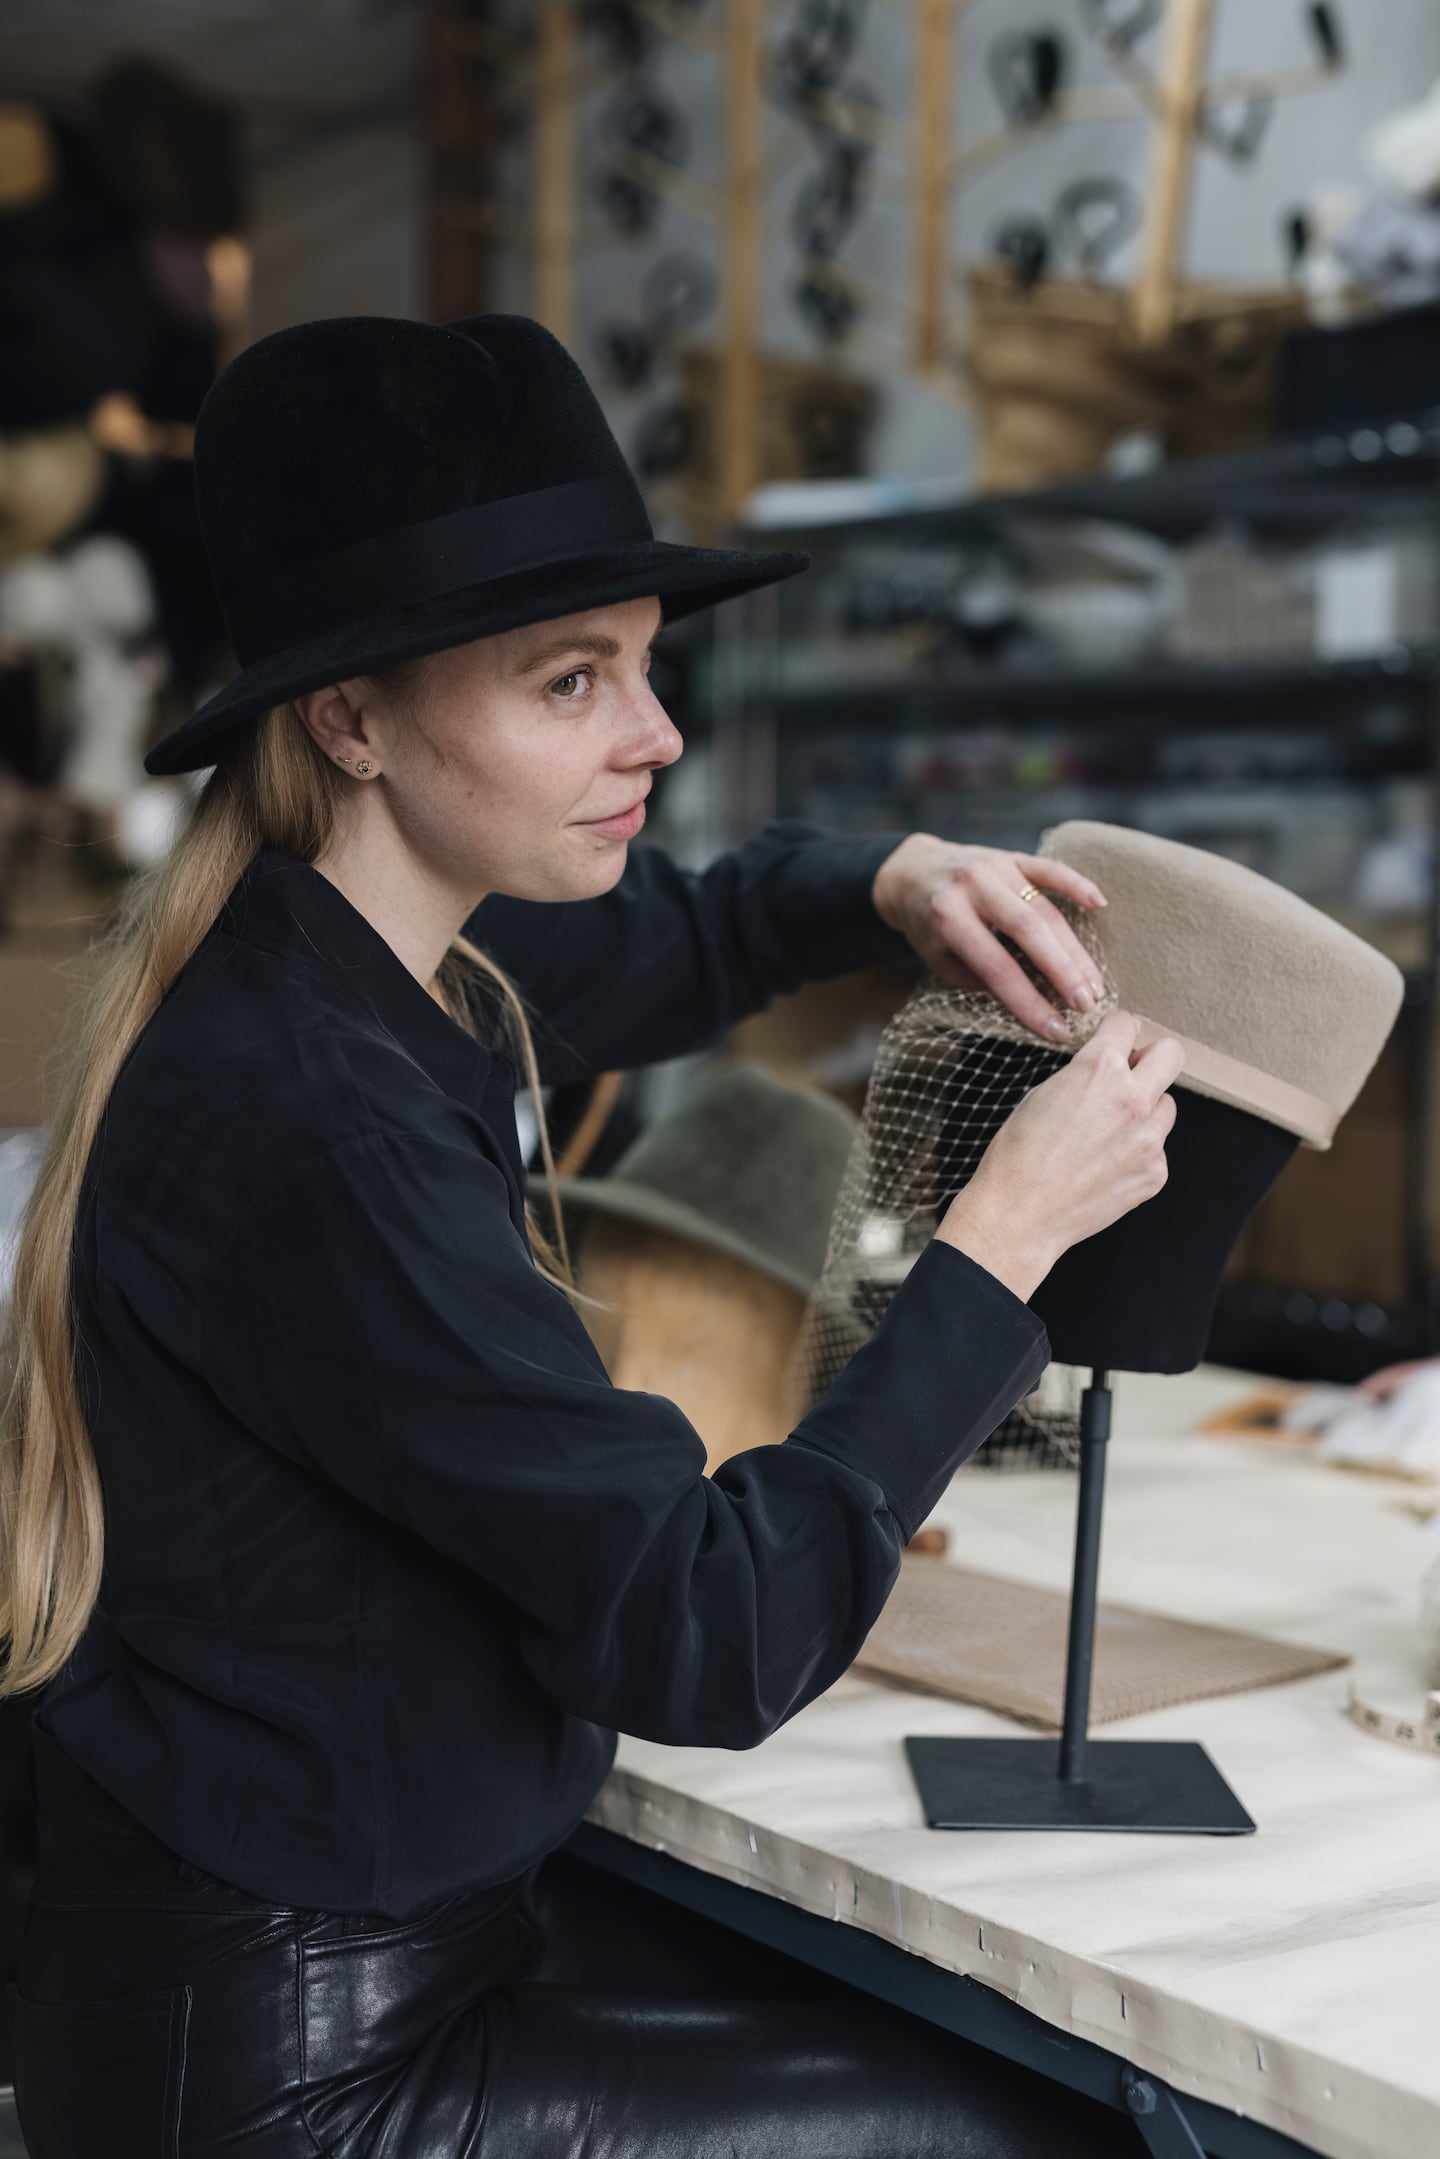 Accessories designer and milliner Gigi Burris O'Hara, who is launching Closely Crafted, making a hat.